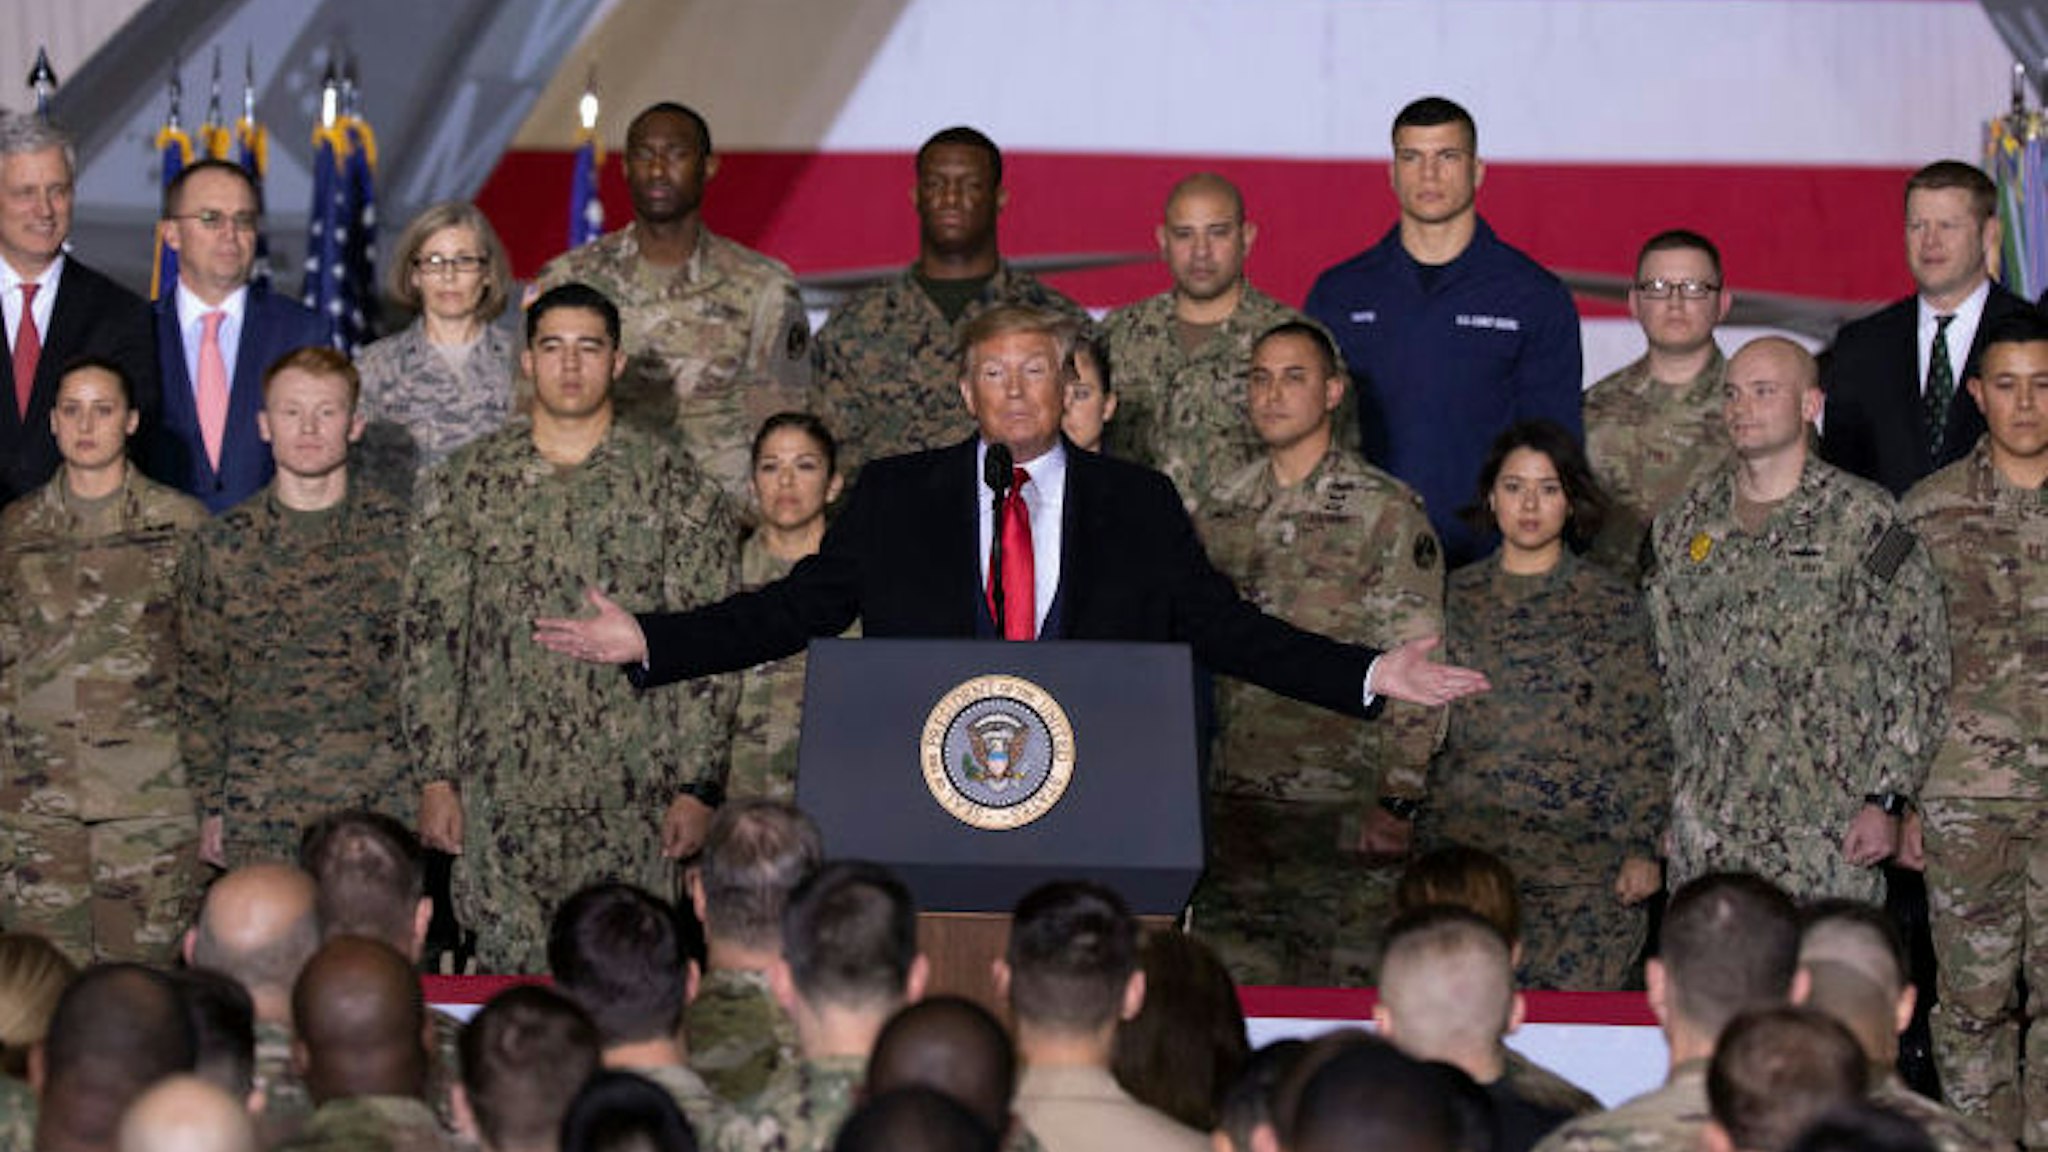 US President Donald Trump speaks at the signing ceremony for S.1709, The National Defense Authorization Act for Fiscal Year 2020 on December 20, 2019 in Joint Base Andrews, Maryland. President Trump is headed to Florida for the Holidays after a historic impeachment vote on the house floor this week. (Photo by Tasos Katopodis/Getty Images)